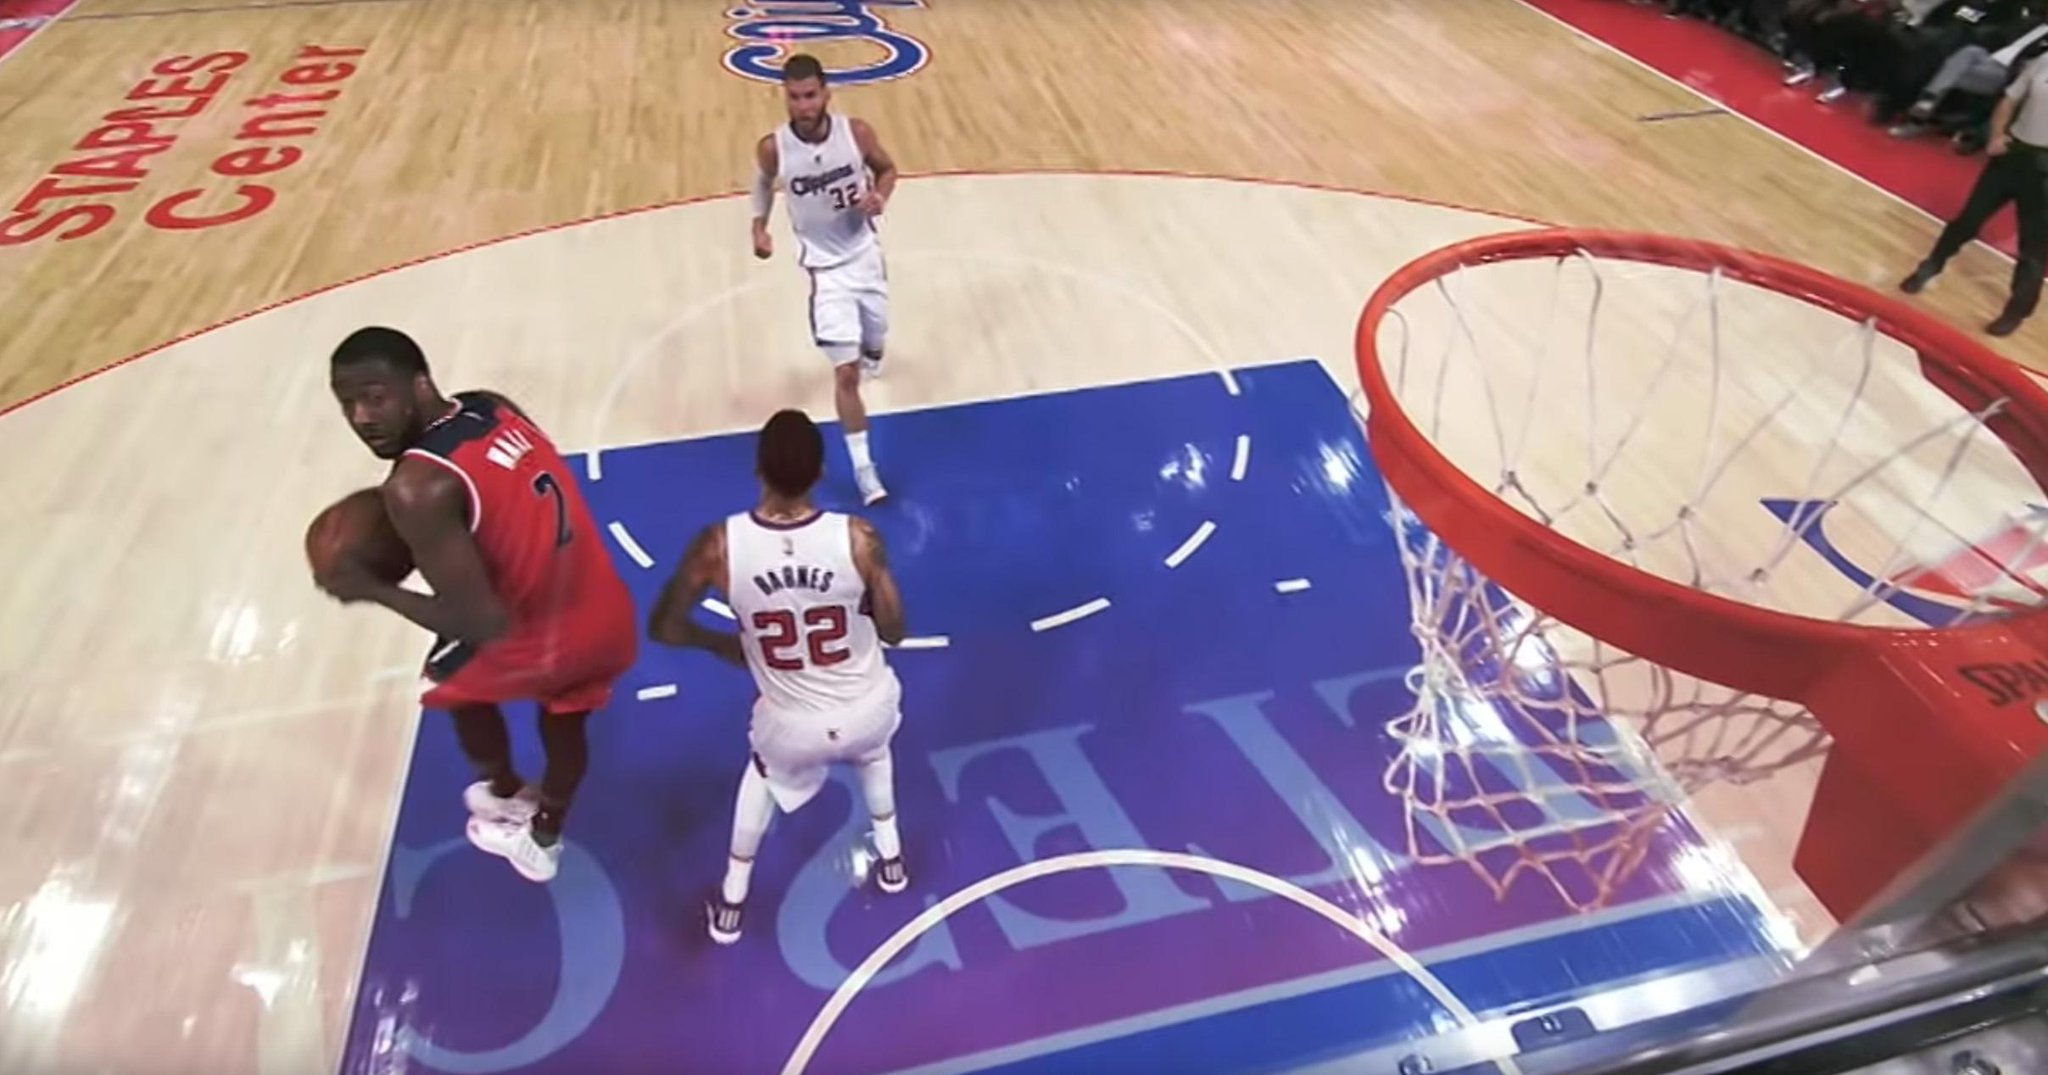 VIDEO: Happy 25th Birthday, John Wall!

Here\s 5 memorable plays from the Wizards star.  